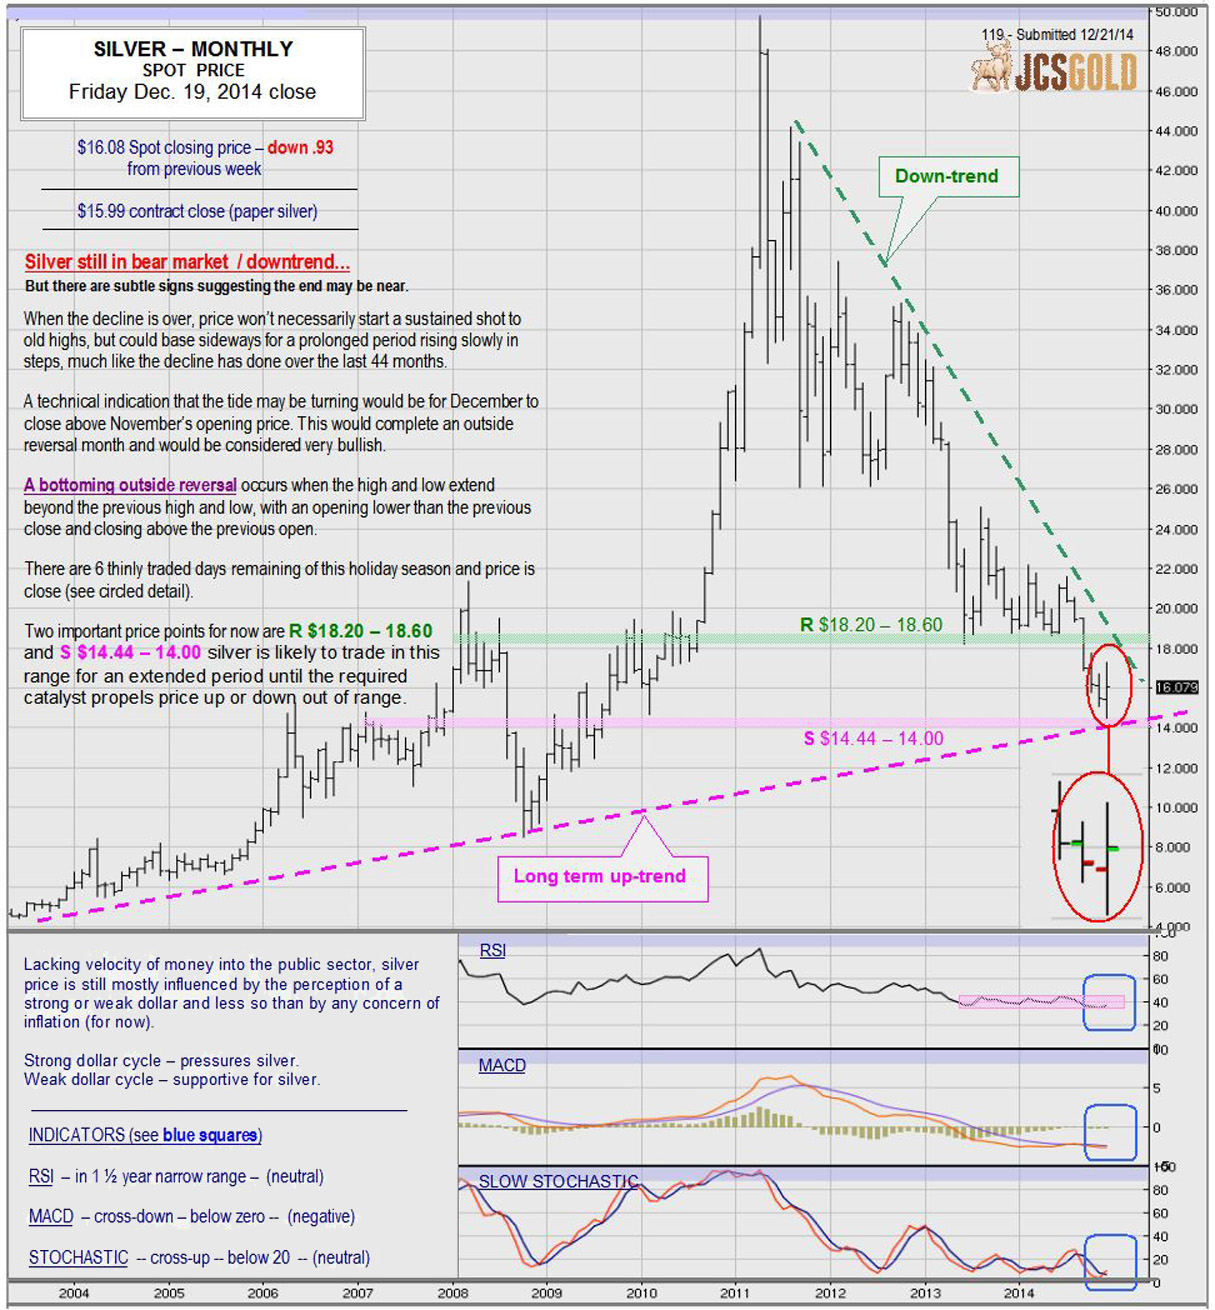 Dec 19, 2014 chart & commentary